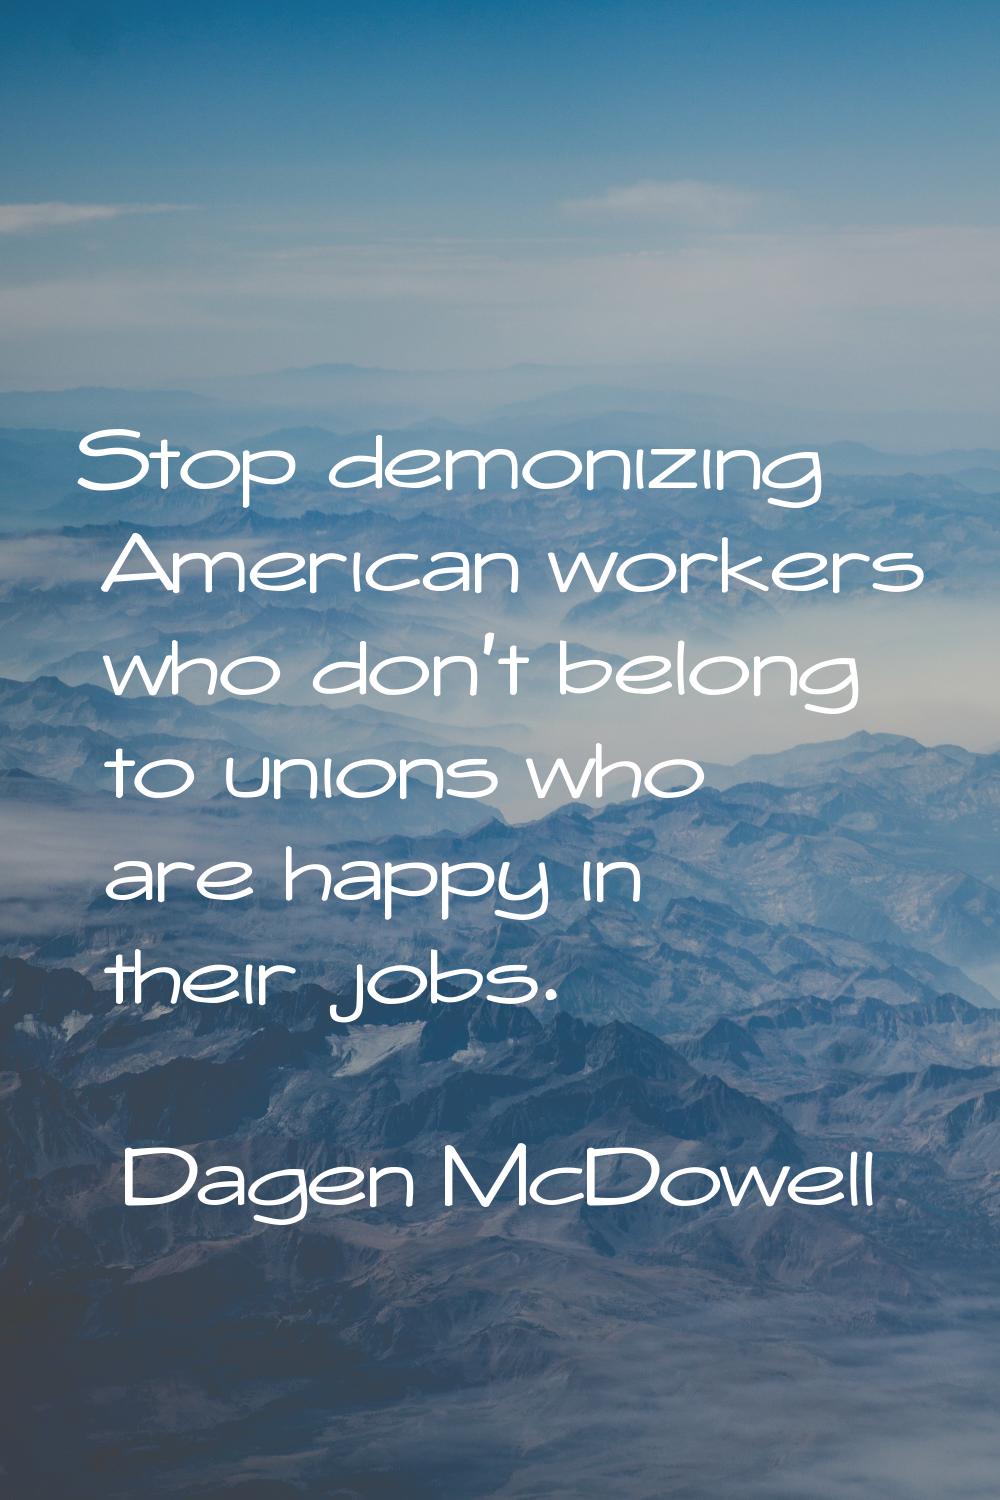 Stop demonizing American workers who don't belong to unions who are happy in their jobs.